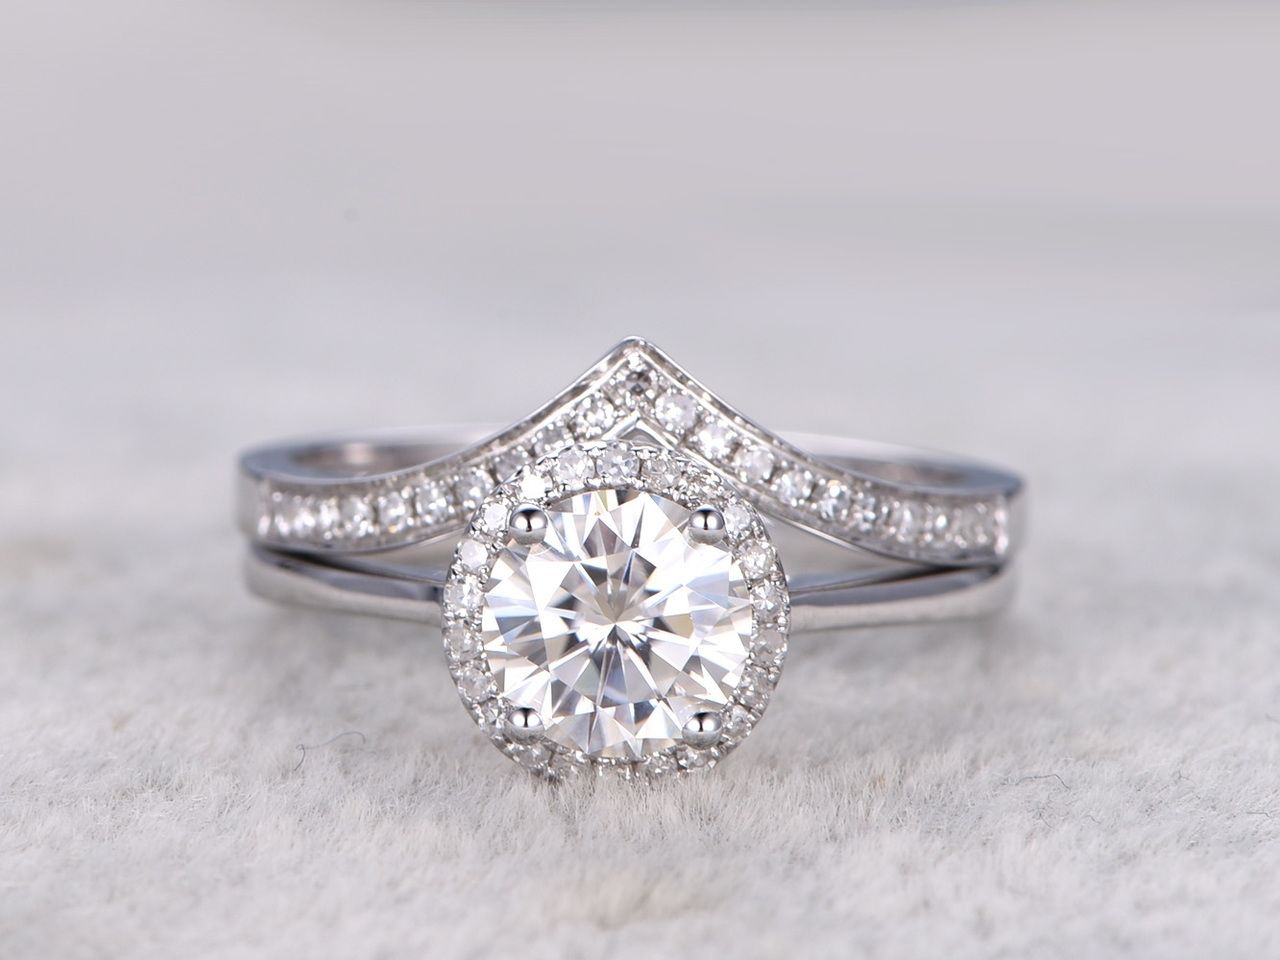 Moissanite Engagement Ring Set Diamond Wedding Bands White Gold Throughout Most Recent Chevron Shaped Rings (View 7 of 15)